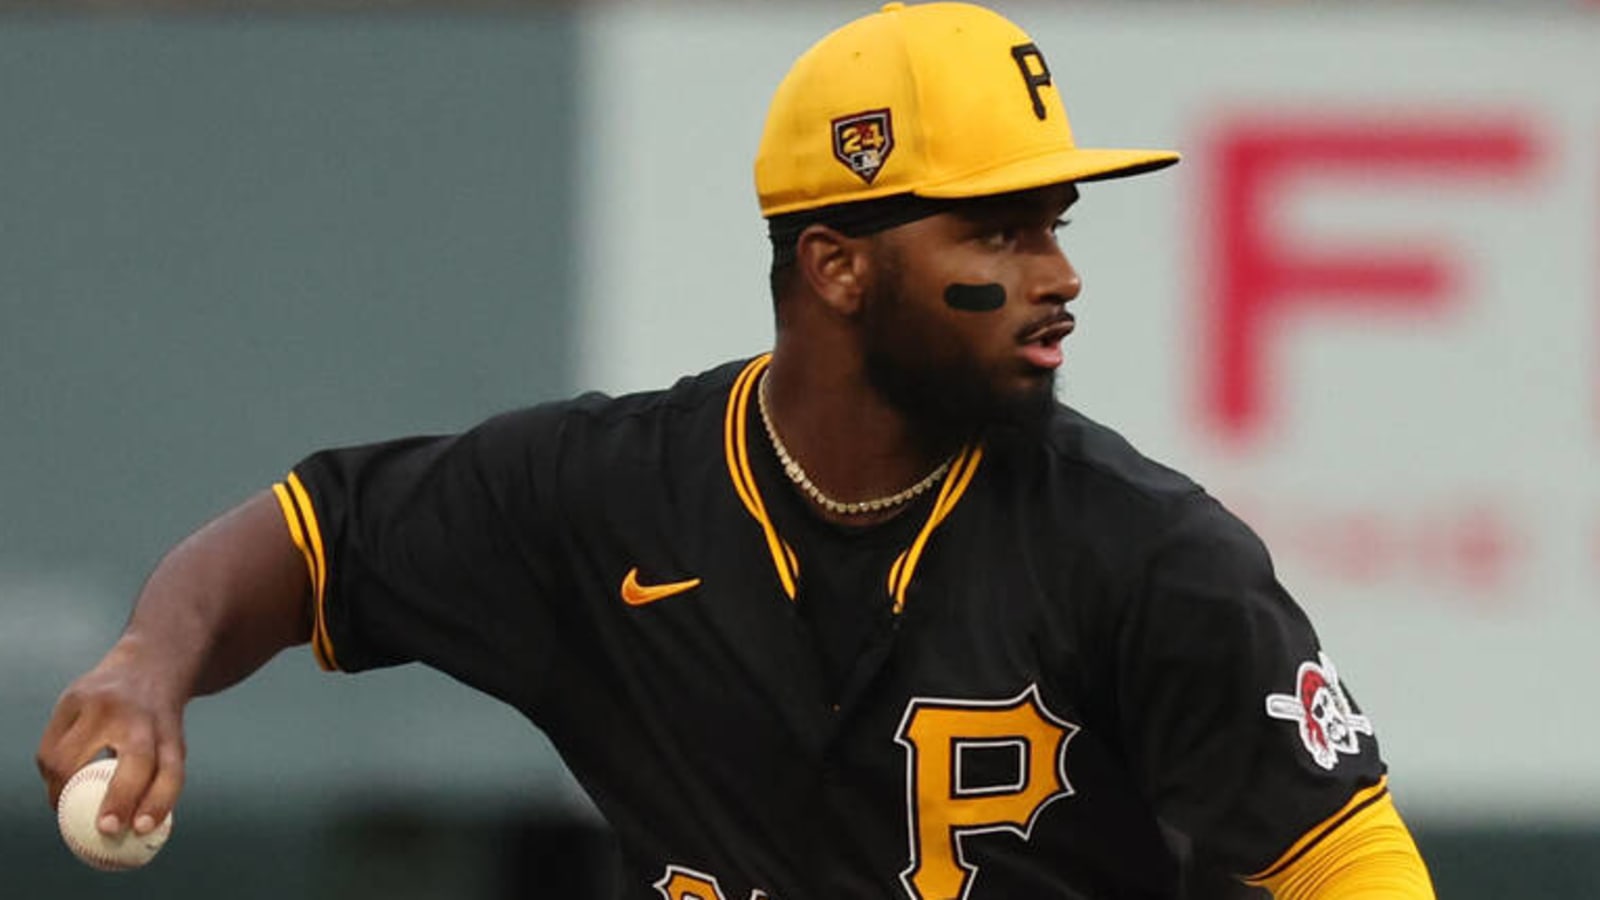 Pirates option promising second-year infielder